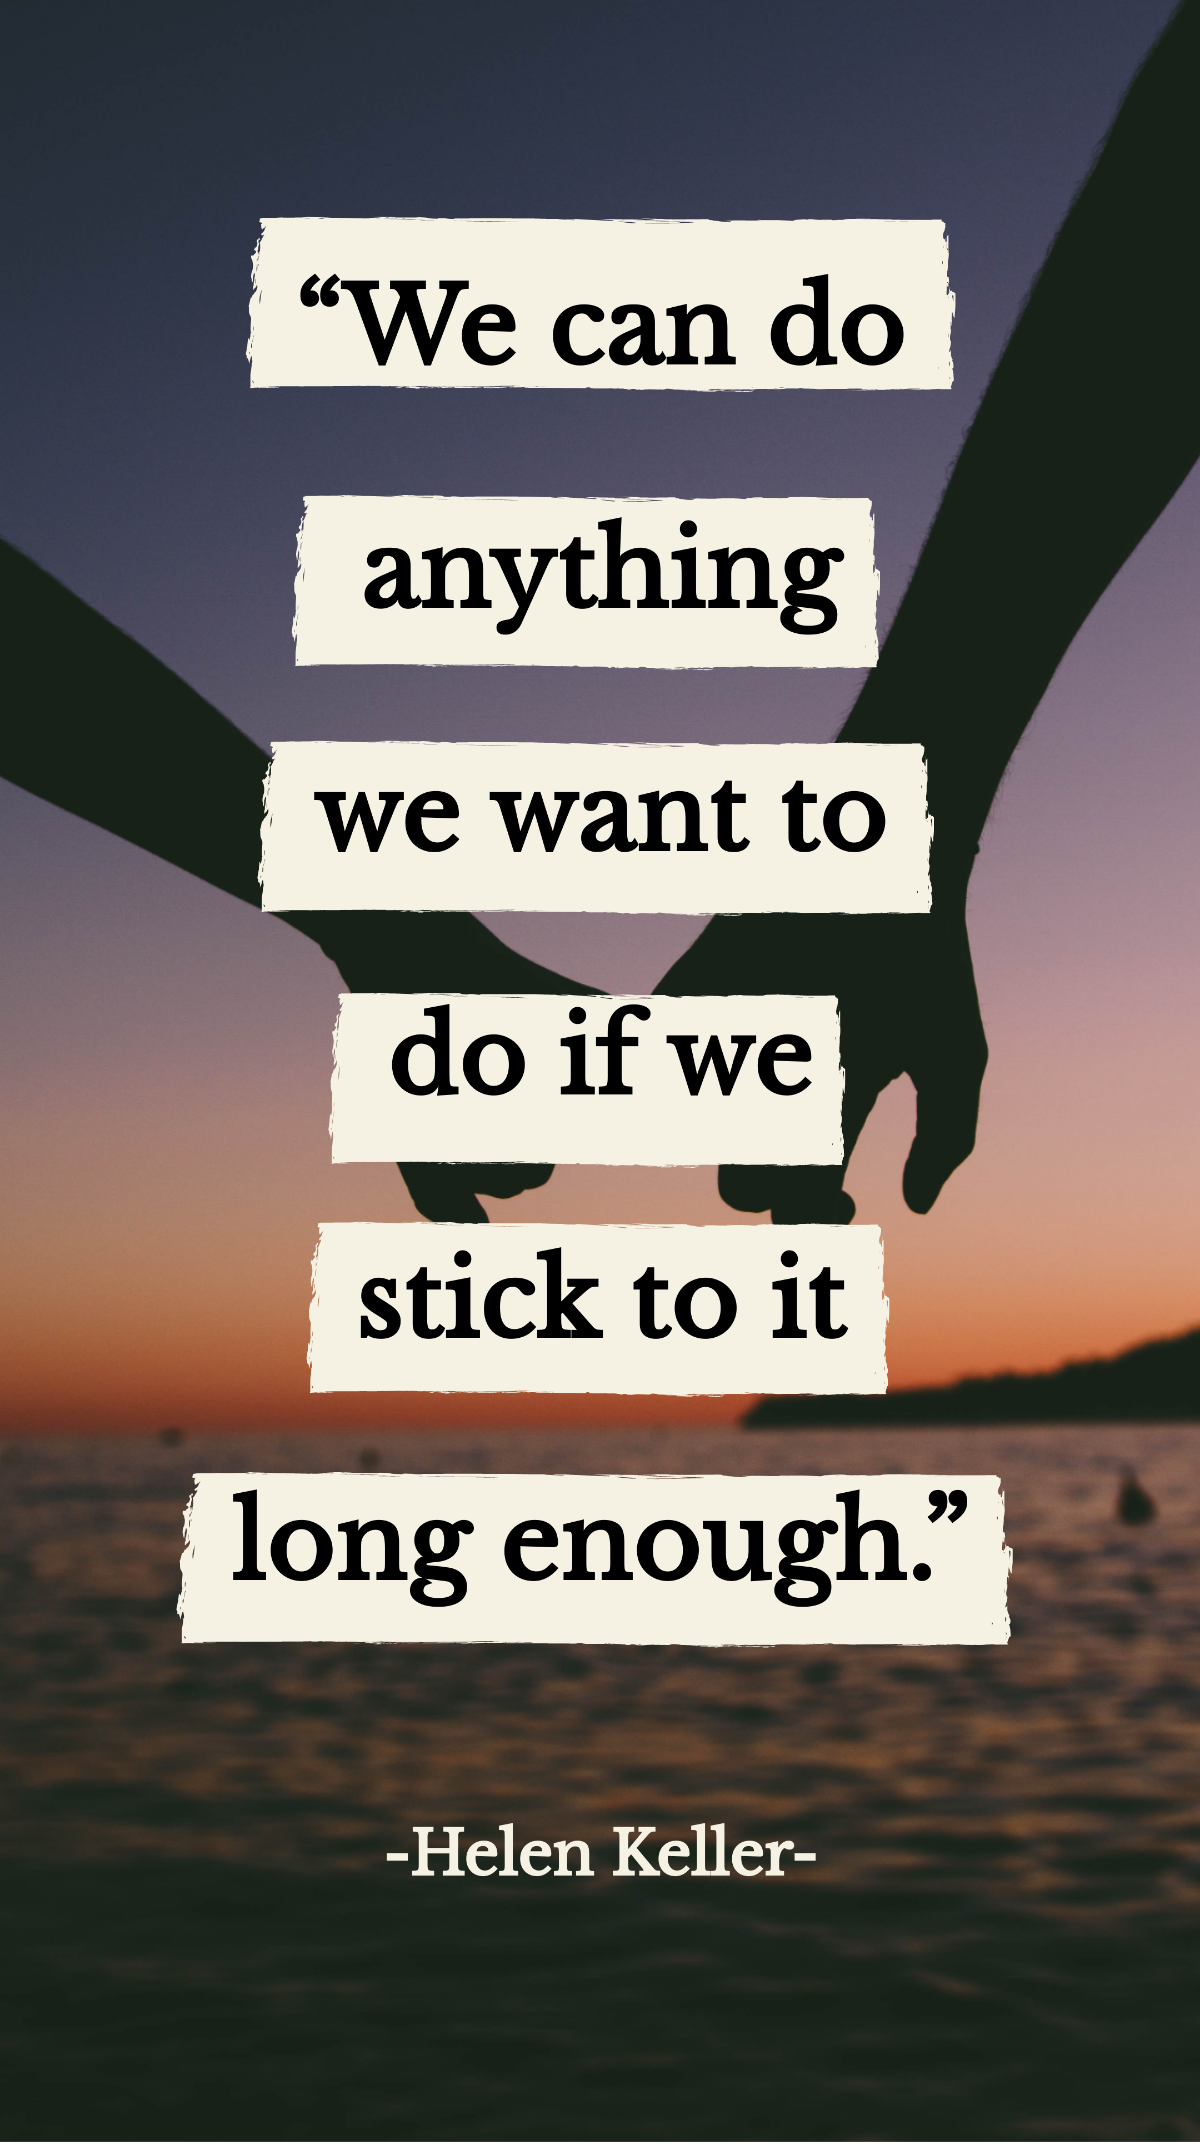 Helen Keller - “We can do anything we want to do if we stick to it long enough.” Template